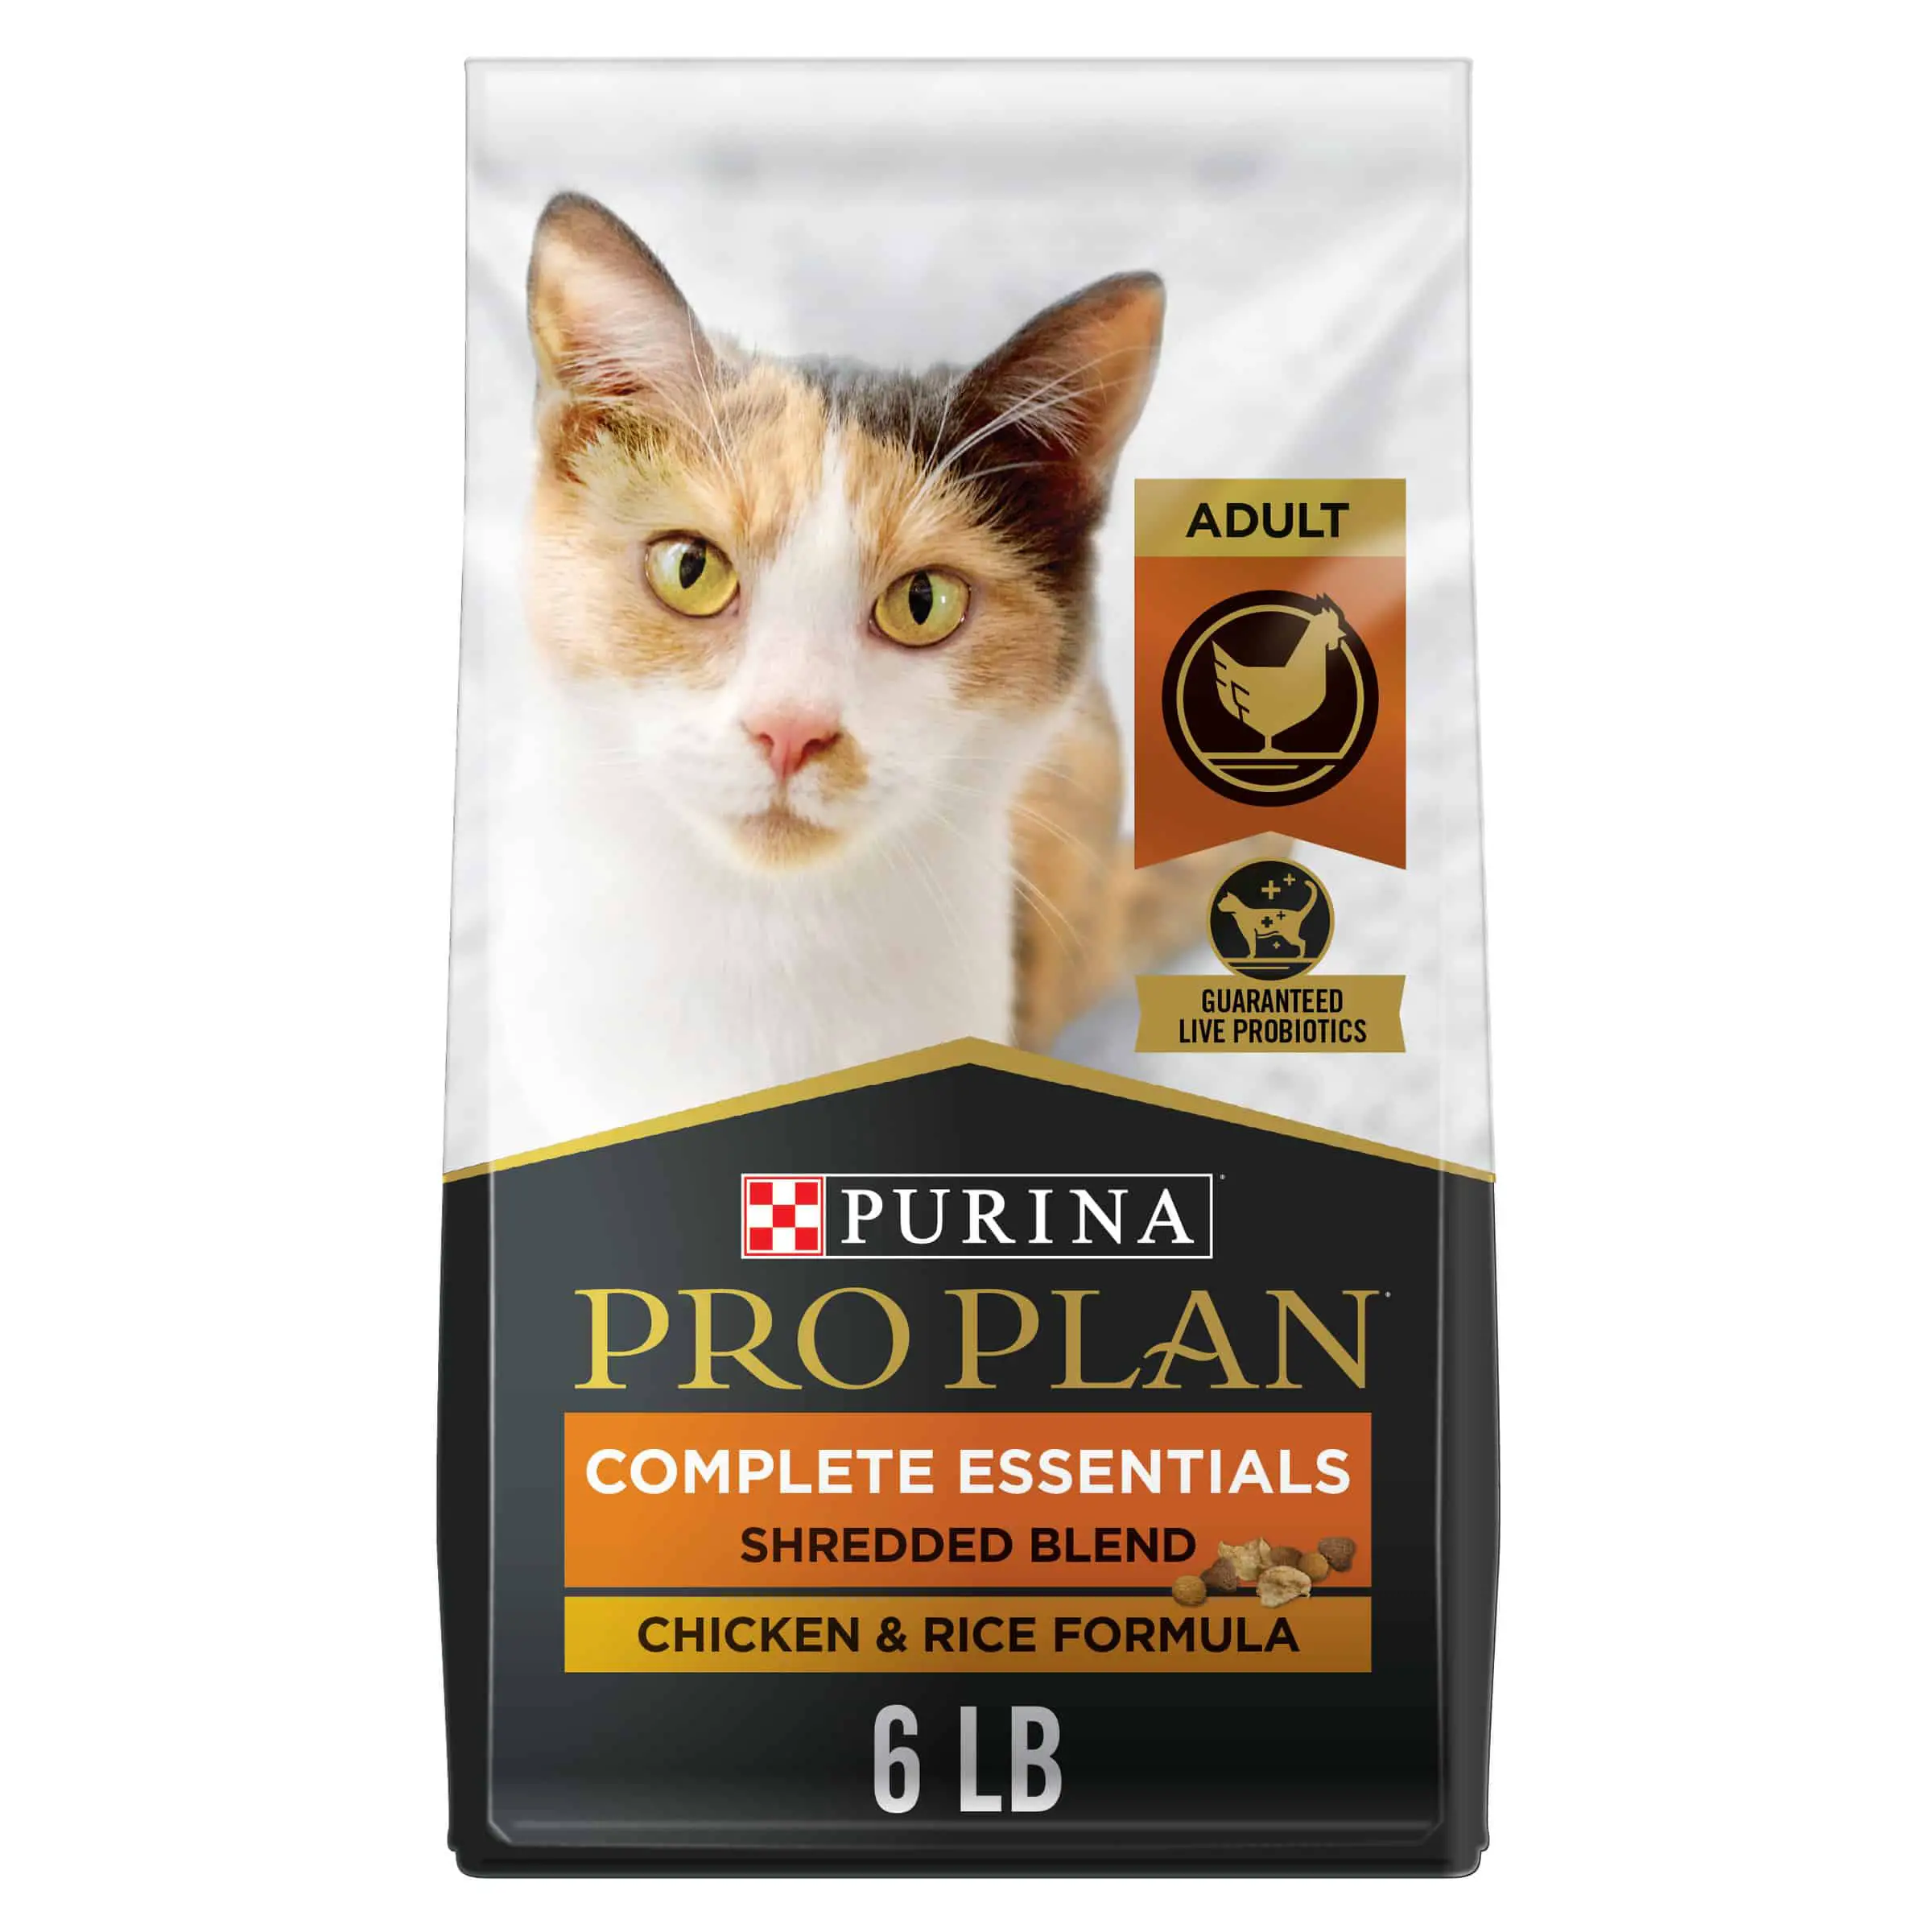 Purina Pro Plan High Protein Cat Food With Probiotics for Cats ...